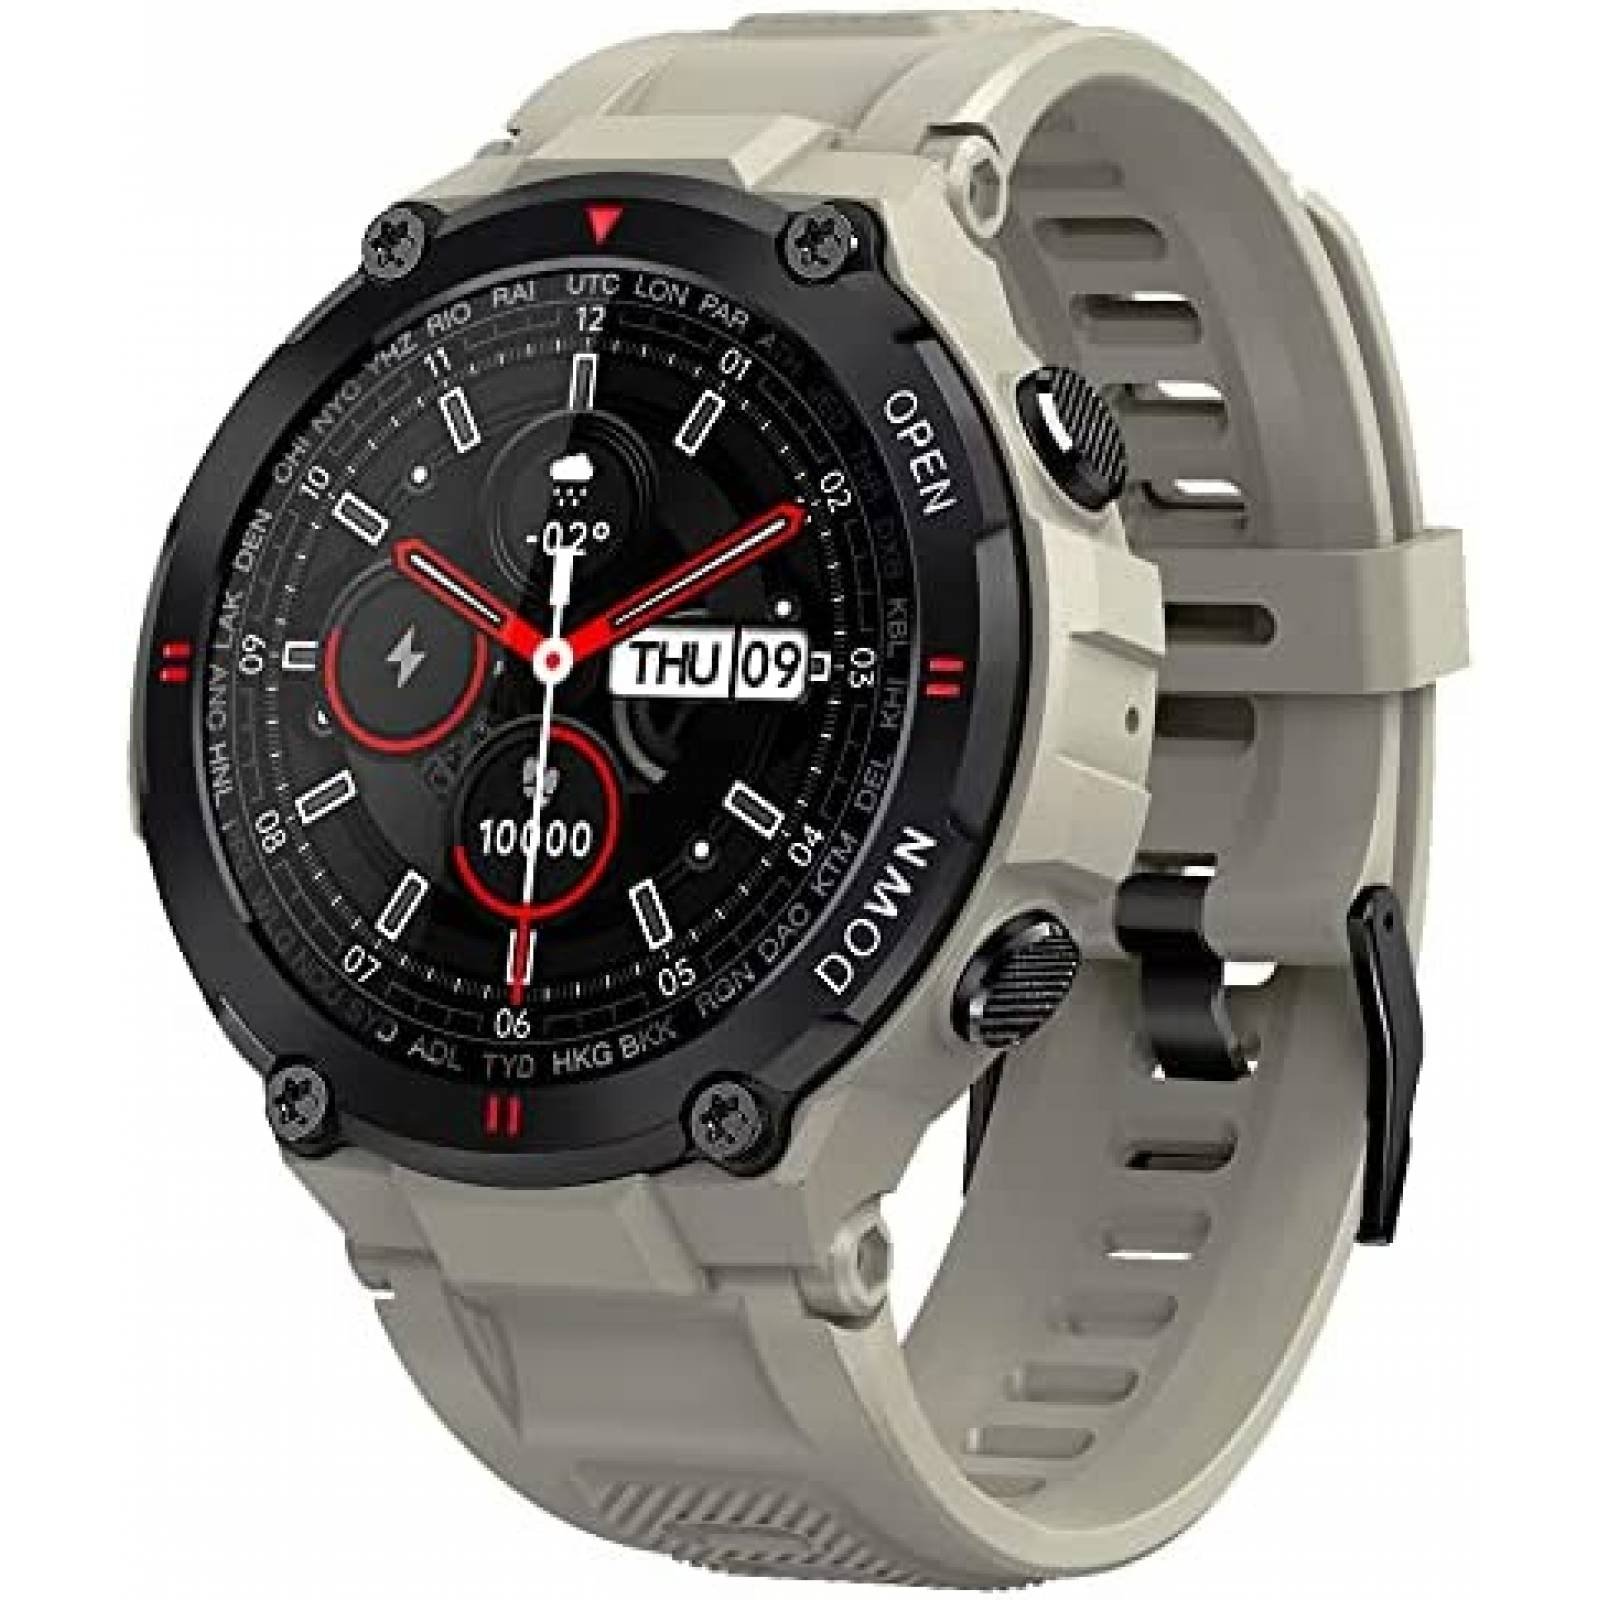 Smartwatch Militar GUCABE 1.3 ip67 LCD Tactil -Blanco